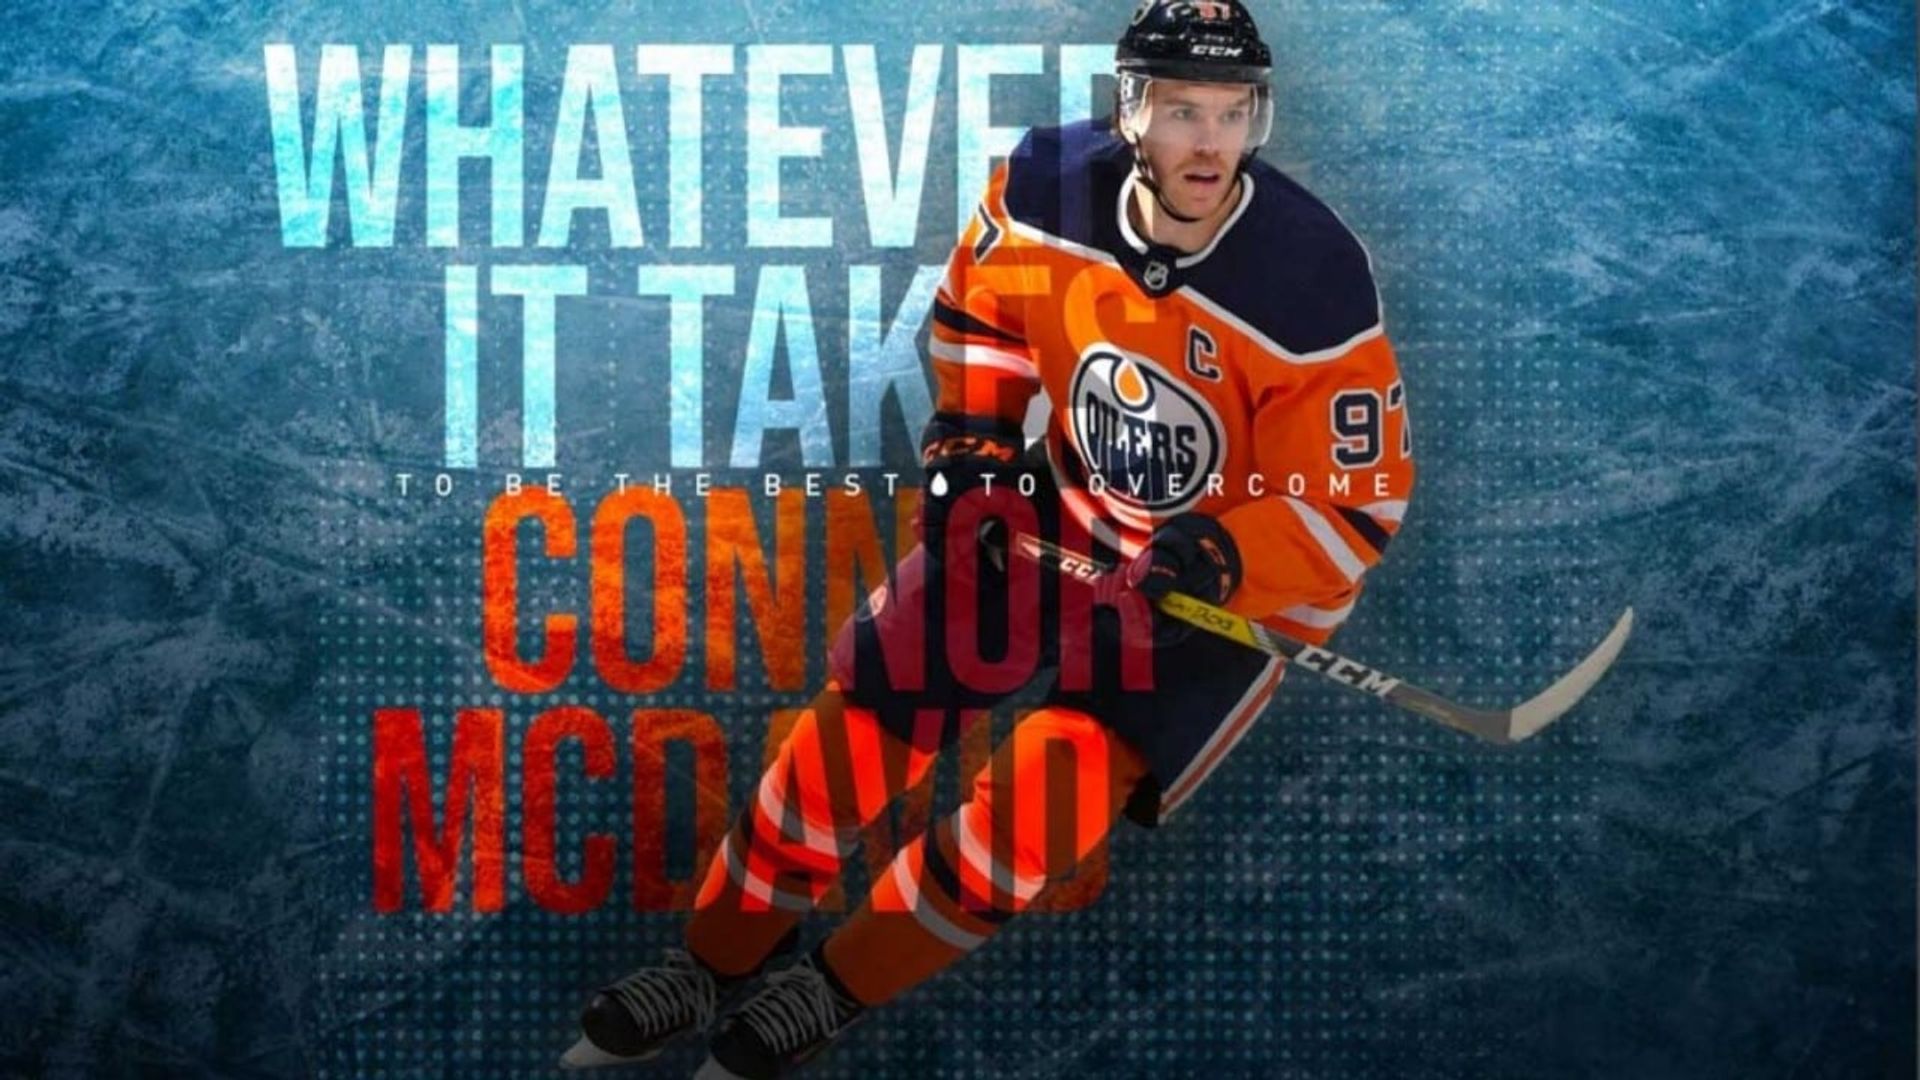 Connor McDavid: Whatever It Takes background